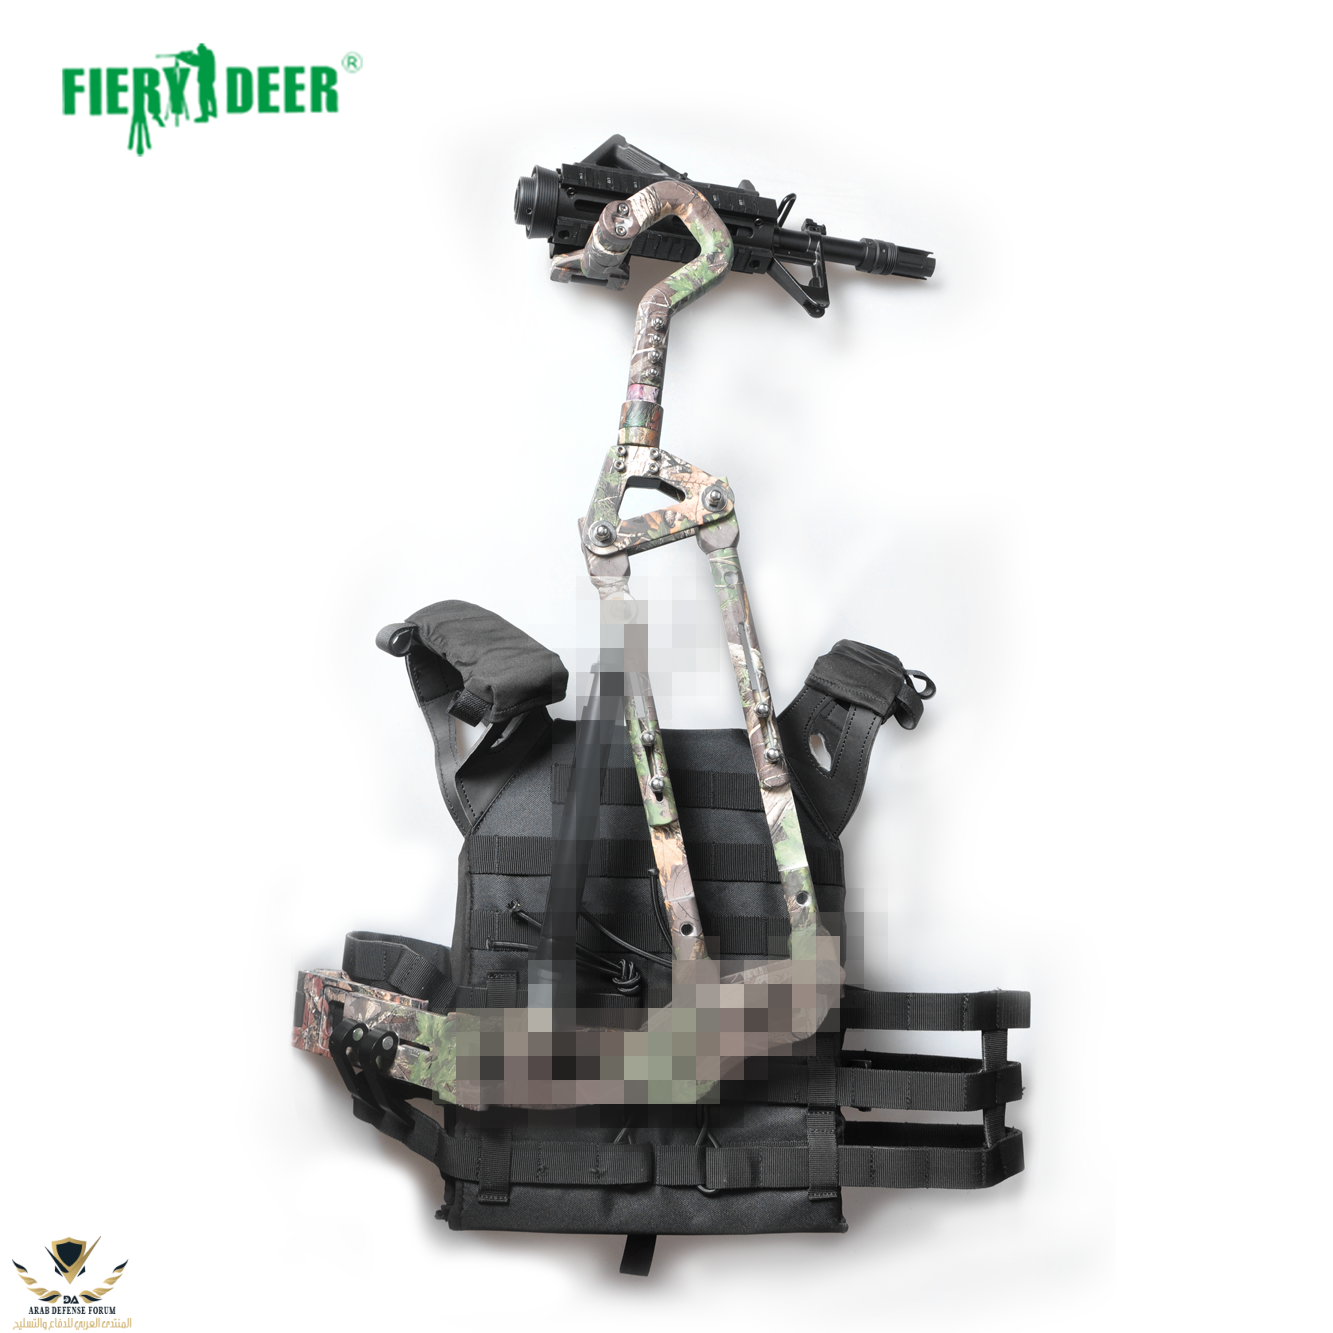 FieryDeer-the-third-arm-New-robot-arm-hunting-equipment-makes-it-easier-to-aim-and-shoot.png